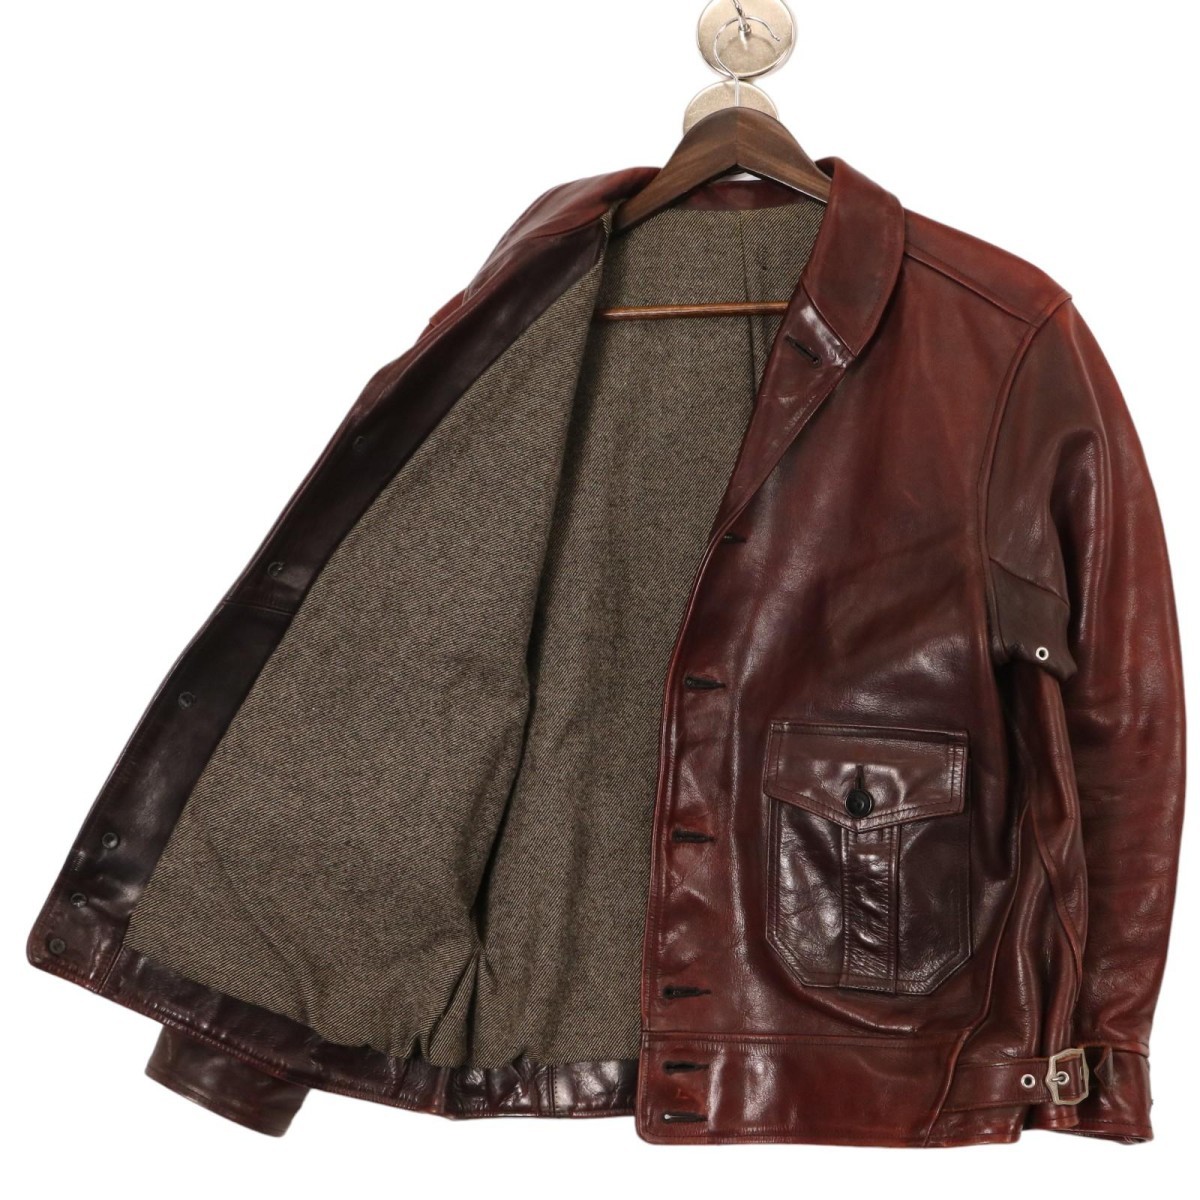 Dapper's / A-1 TYPE LEATHER SPORTS JACKET ダッパーズ レザー スポーツジャケット 革ジャン 1033 表記サイズ42_画像3